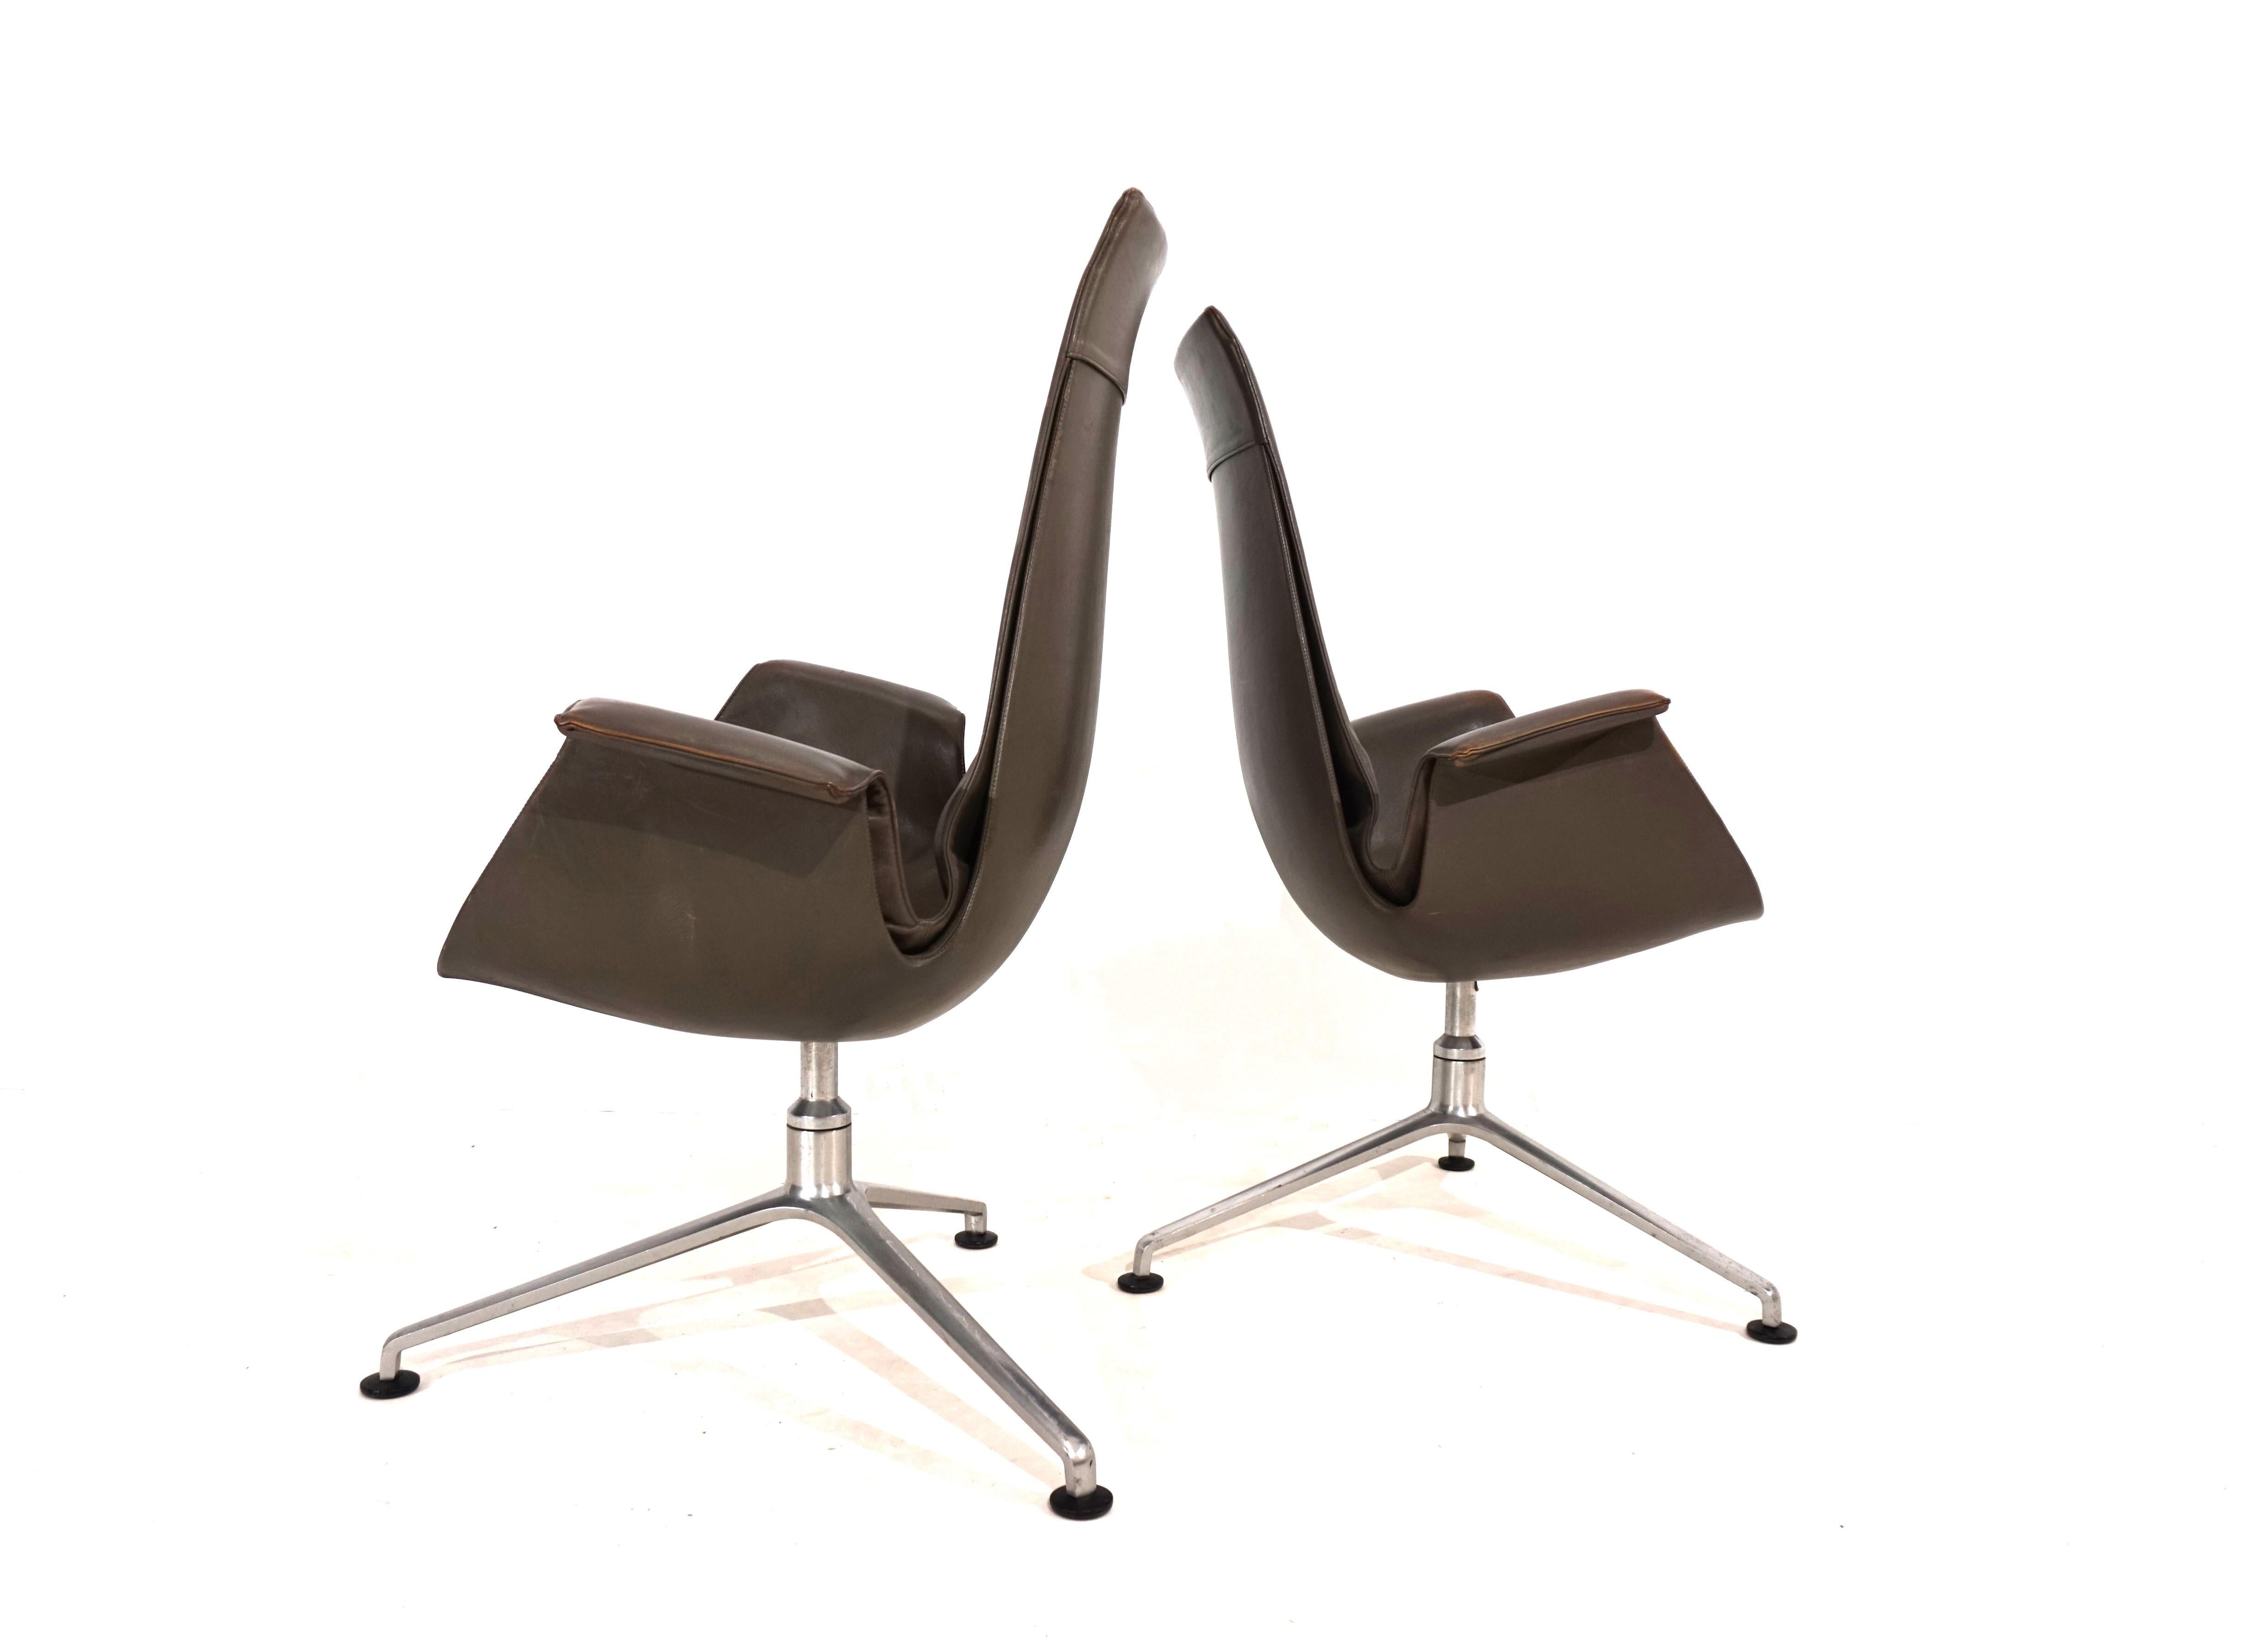 This pair of elegant FK 6725 Bird high back chairs comes in very good condition. The taupe-colored leather of the chairs shows hardly any signs of wear and has a charming patina on the armrests. The typical tripod frames show age-appropriate signs